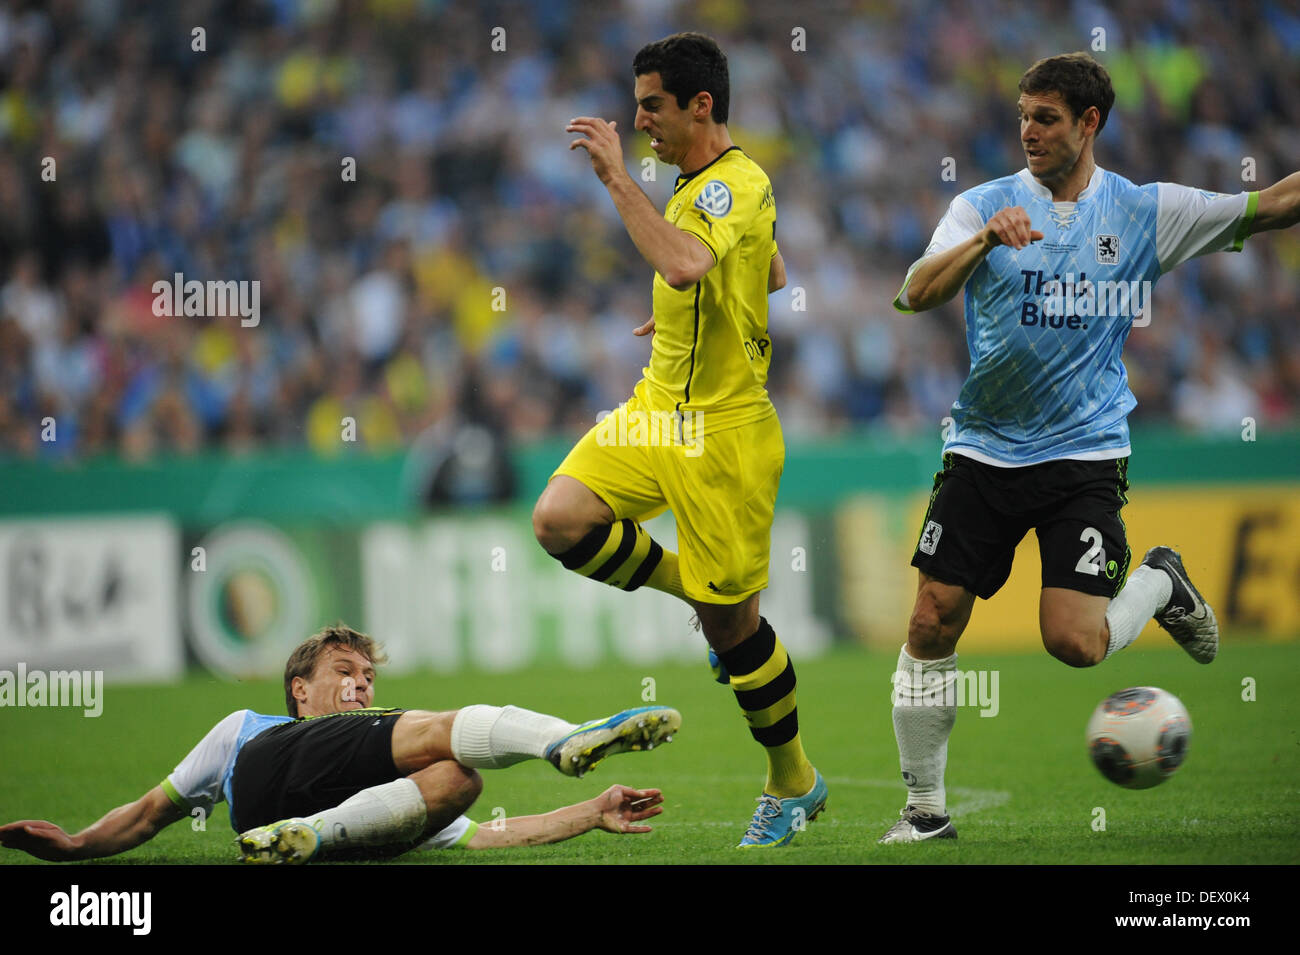 Munich, Germany. 24th Sep, 2013. Kai Buelow (L) and Moritz Volz (R) of Munich cut off Henrich Mchitarjan from the ball during the DFB Cup second round match TSV 1860 Munich vs. Borussia Dortmund at the Allianz Arena in Munich, Germany. Credit:  dpa picture alliance/Alamy Live News Stock Photo